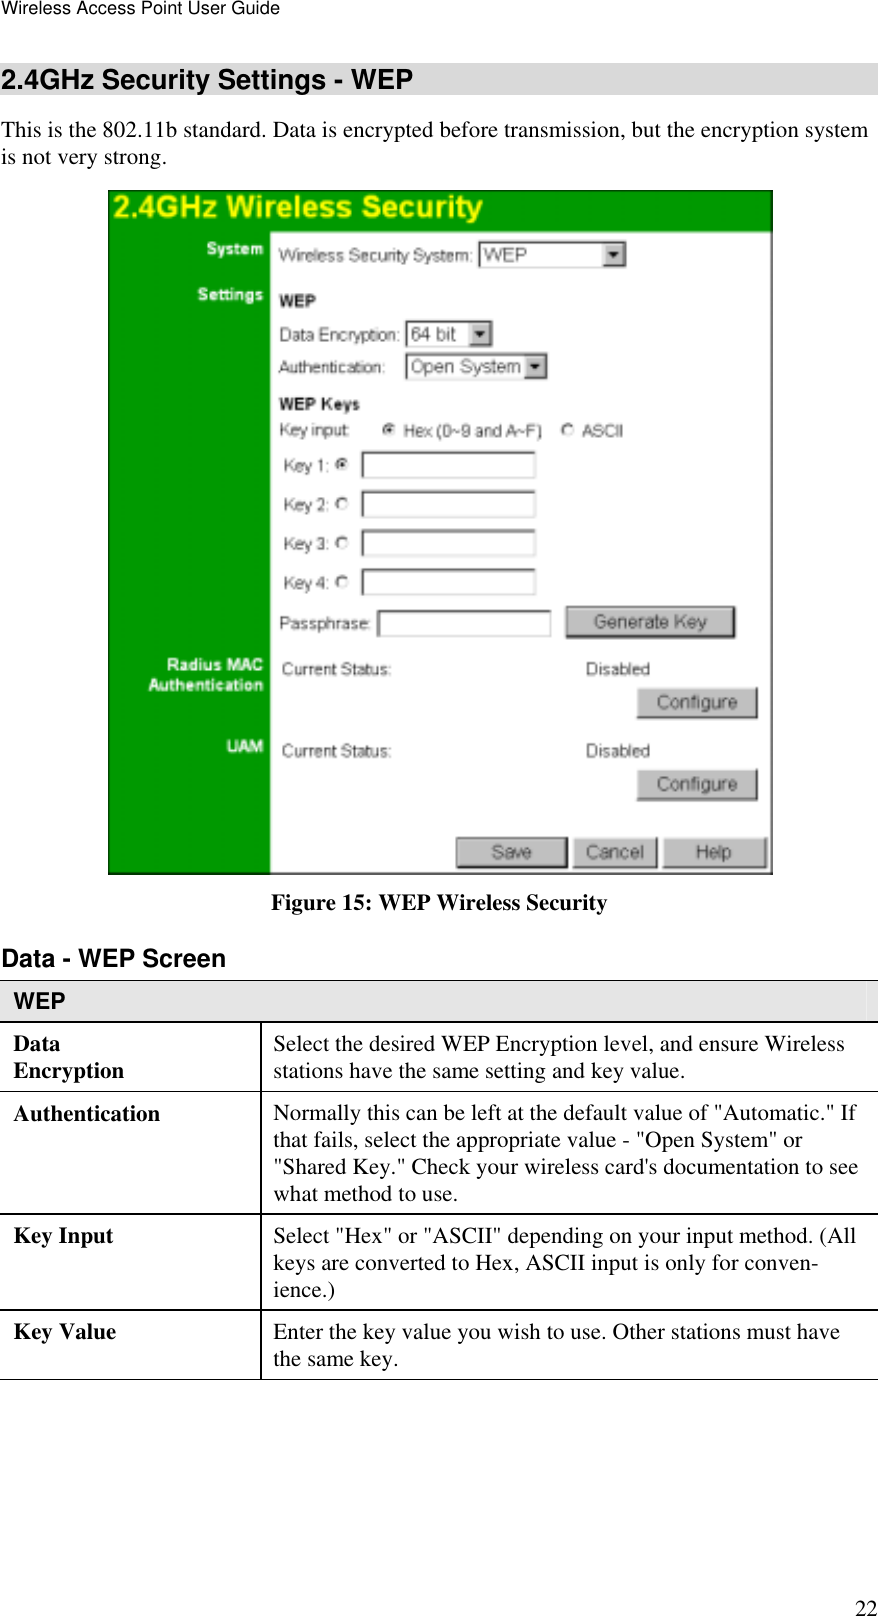 Wireless Access Point User Guide 22 2.4GHz Security Settings - WEP This is the 802.11b standard. Data is encrypted before transmission, but the encryption system is not very strong.  Figure 15: WEP Wireless Security Data - WEP Screen  WEP Data Encryption  Select the desired WEP Encryption level, and ensure Wireless stations have the same setting and key value. Authentication   Normally this can be left at the default value of &quot;Automatic.&quot; If that fails, select the appropriate value - &quot;Open System&quot; or &quot;Shared Key.&quot; Check your wireless card&apos;s documentation to see what method to use. Key Input  Select &quot;Hex&quot; or &quot;ASCII&quot; depending on your input method. (All keys are converted to Hex, ASCII input is only for conven-ience.) Key Value  Enter the key value you wish to use. Other stations must have the same key. 